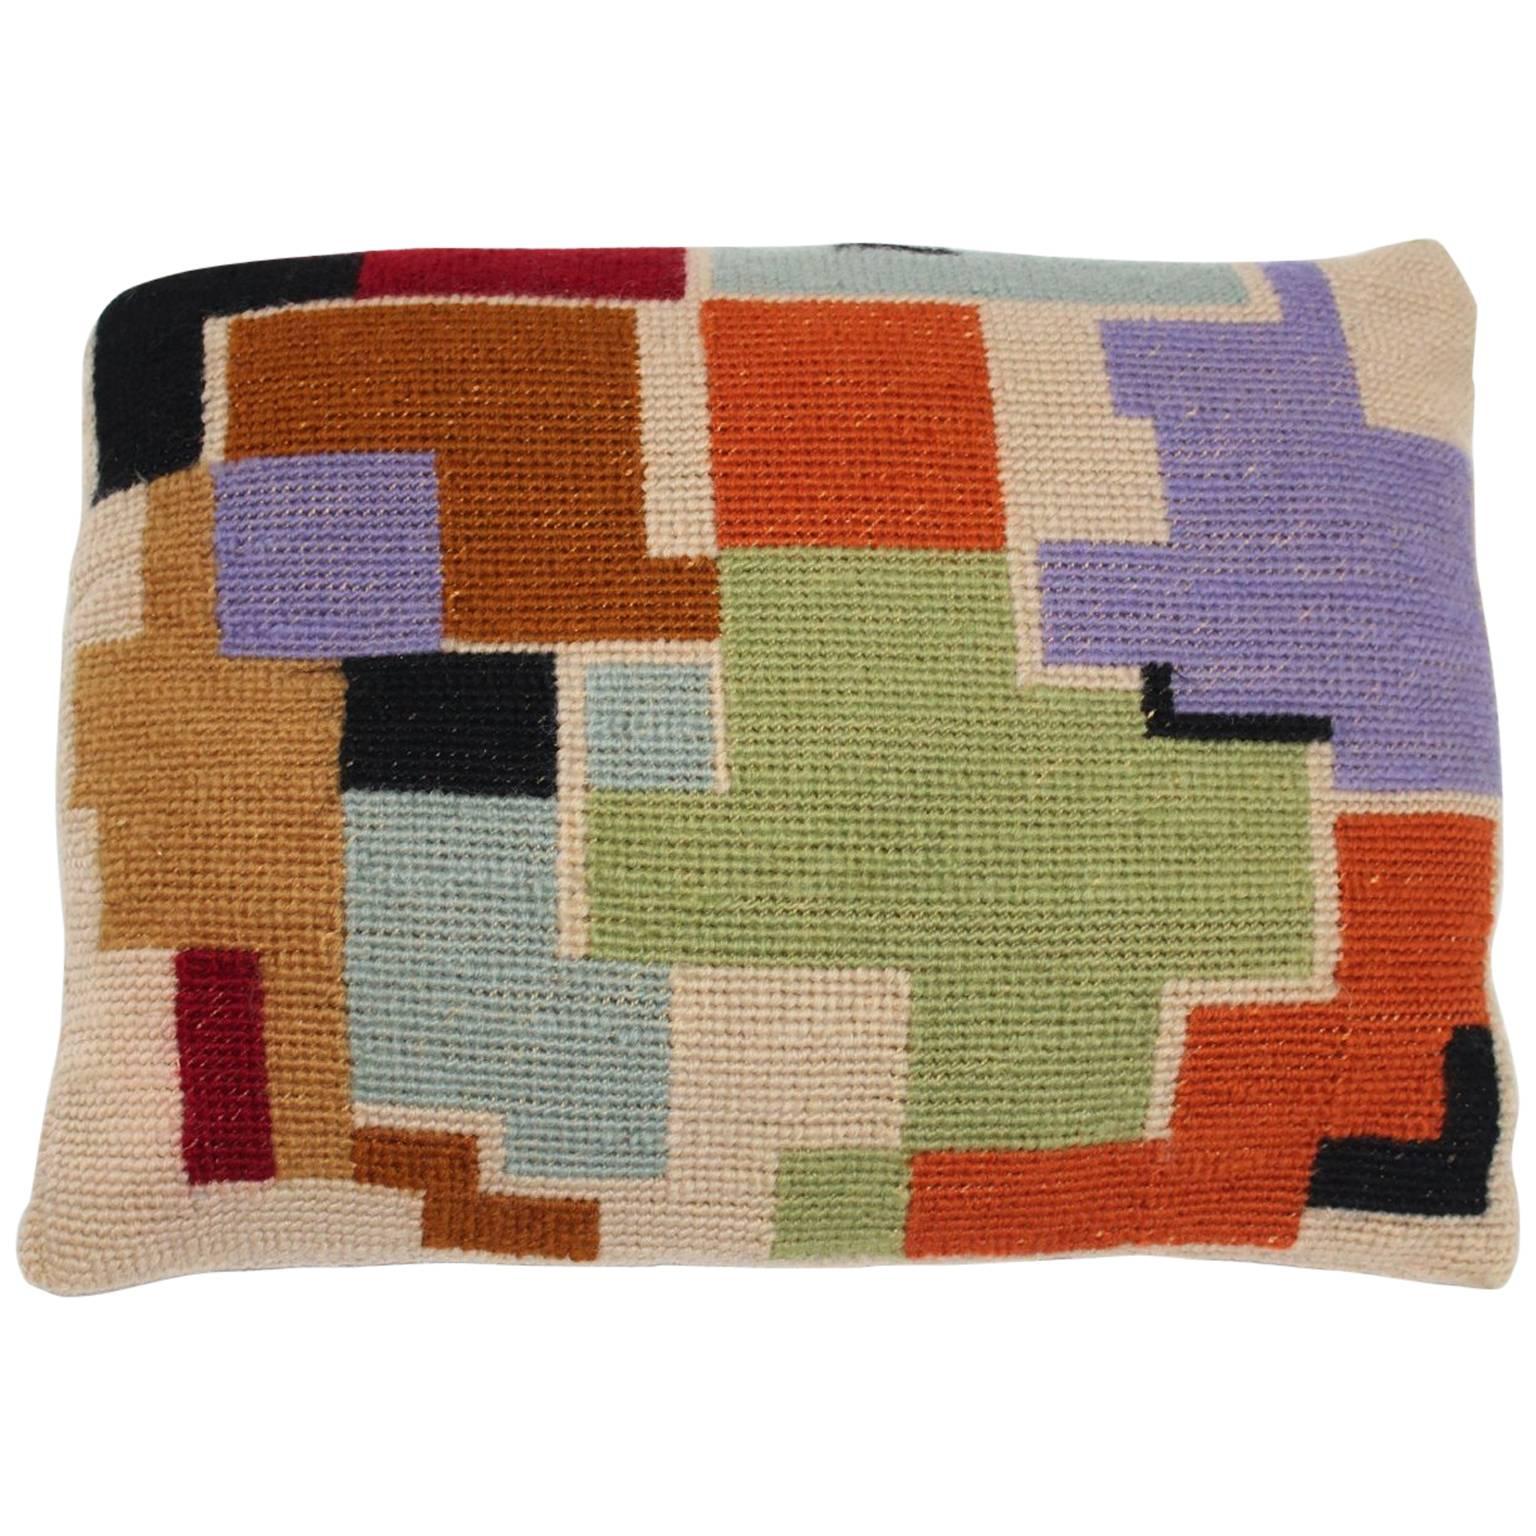 Bauhaus Style Hand Embroidery Wool Pillow with Geometric Design, 1920s